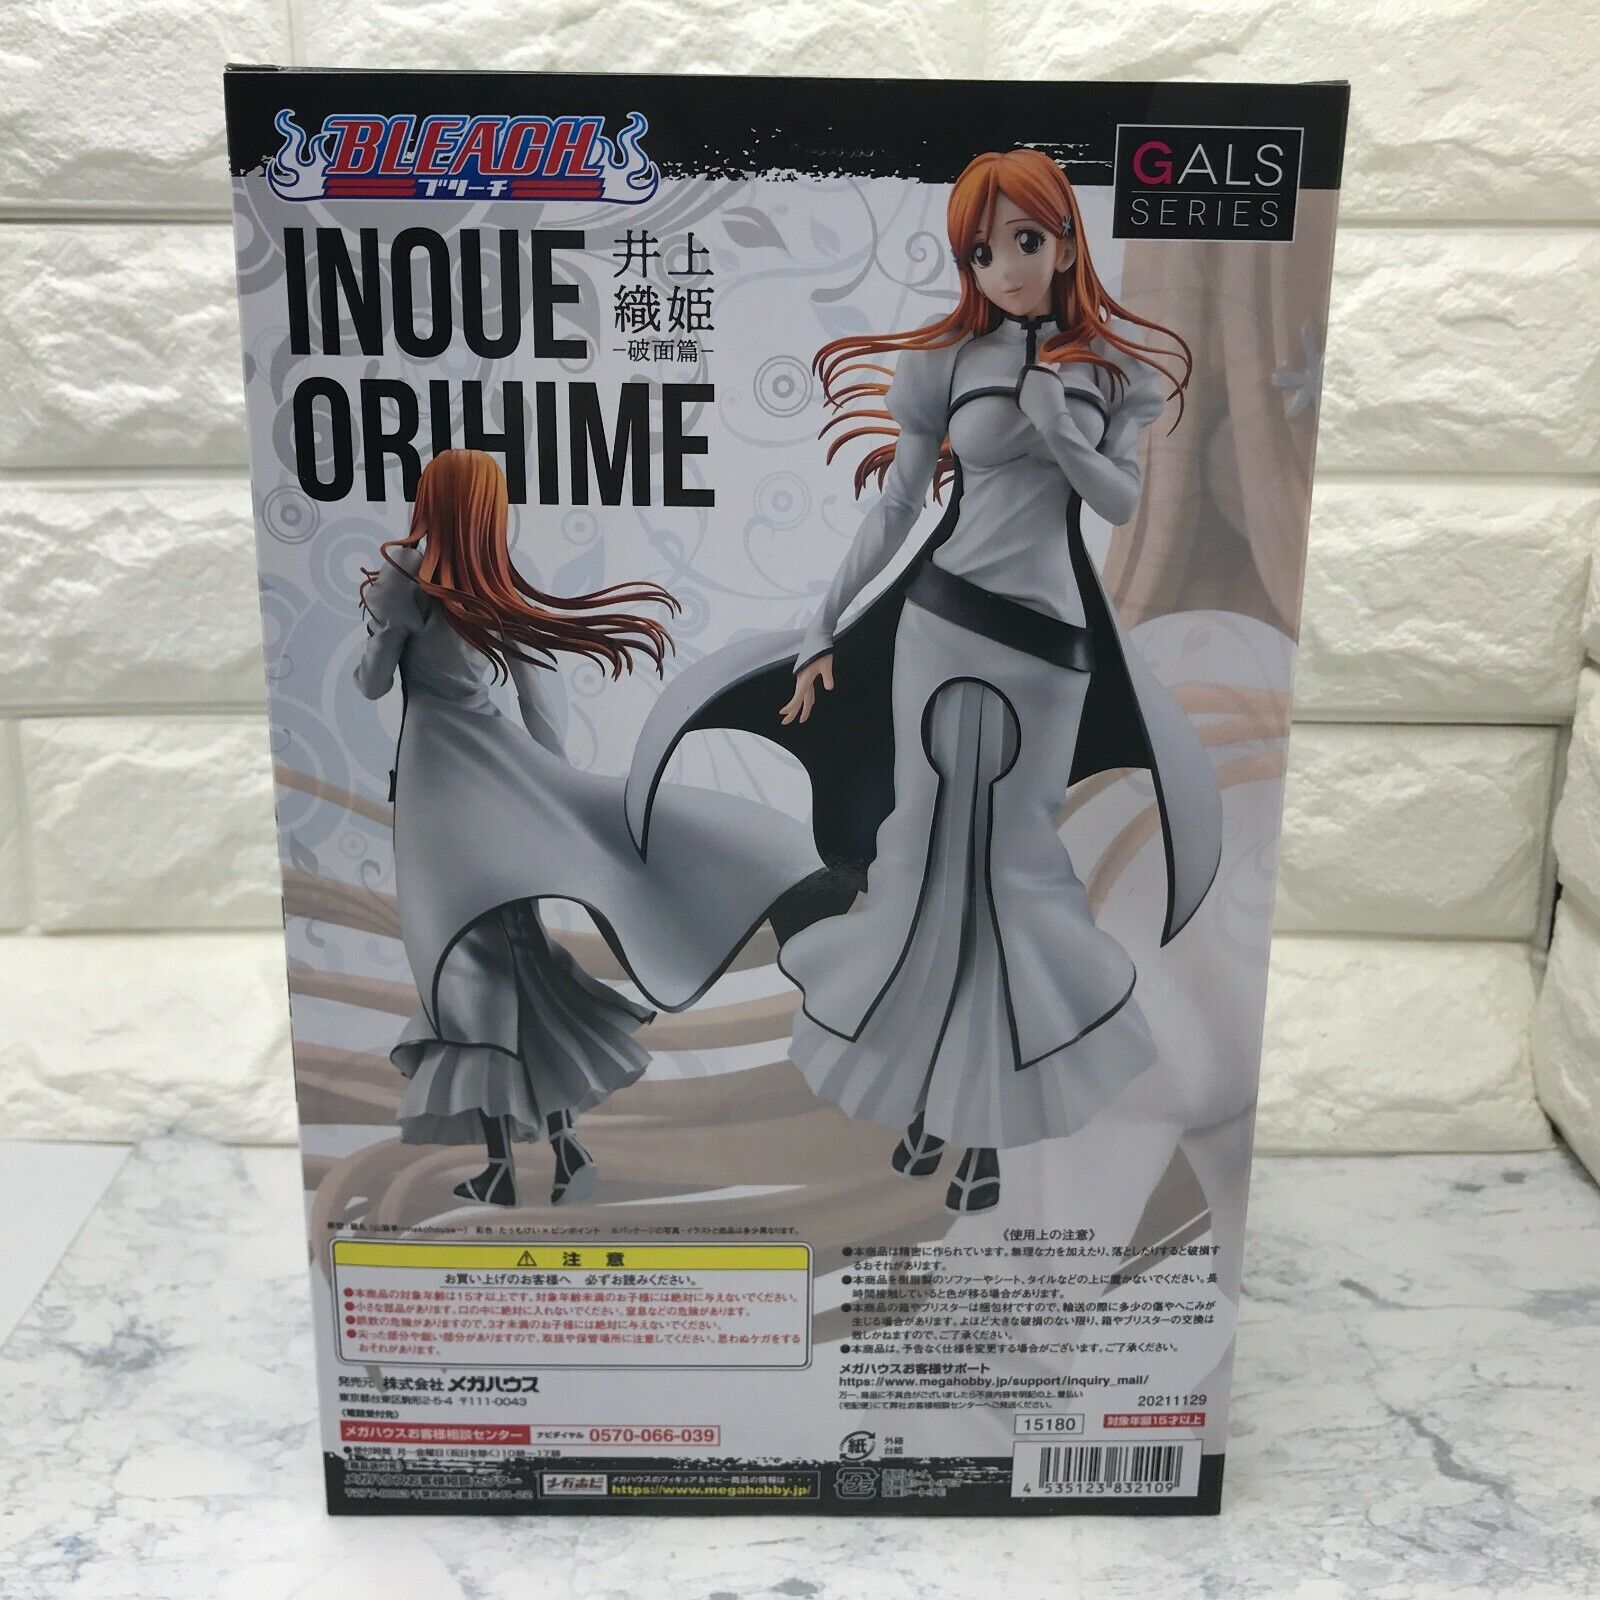 Megahouse Bleach Gals Series Orihime Inoue PVC Figure from JP